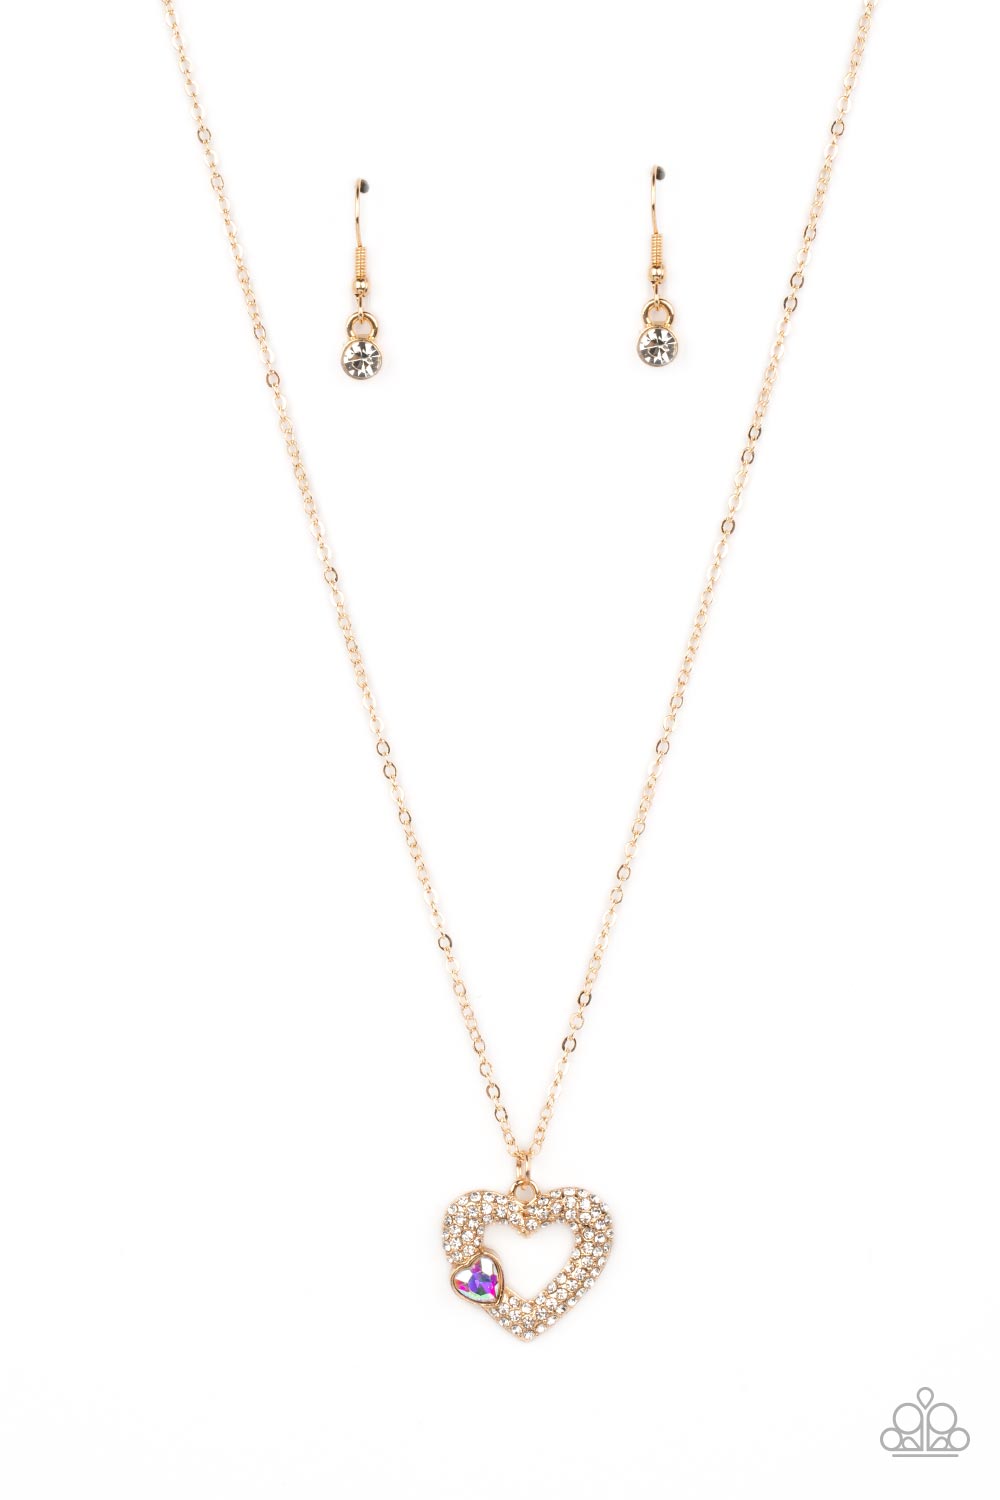 Bedazzled Bliss Multi &amp; Gold Heart Necklace - Paparazzi Accessories- lightbox - CarasShop.com - $5 Jewelry by Cara Jewels